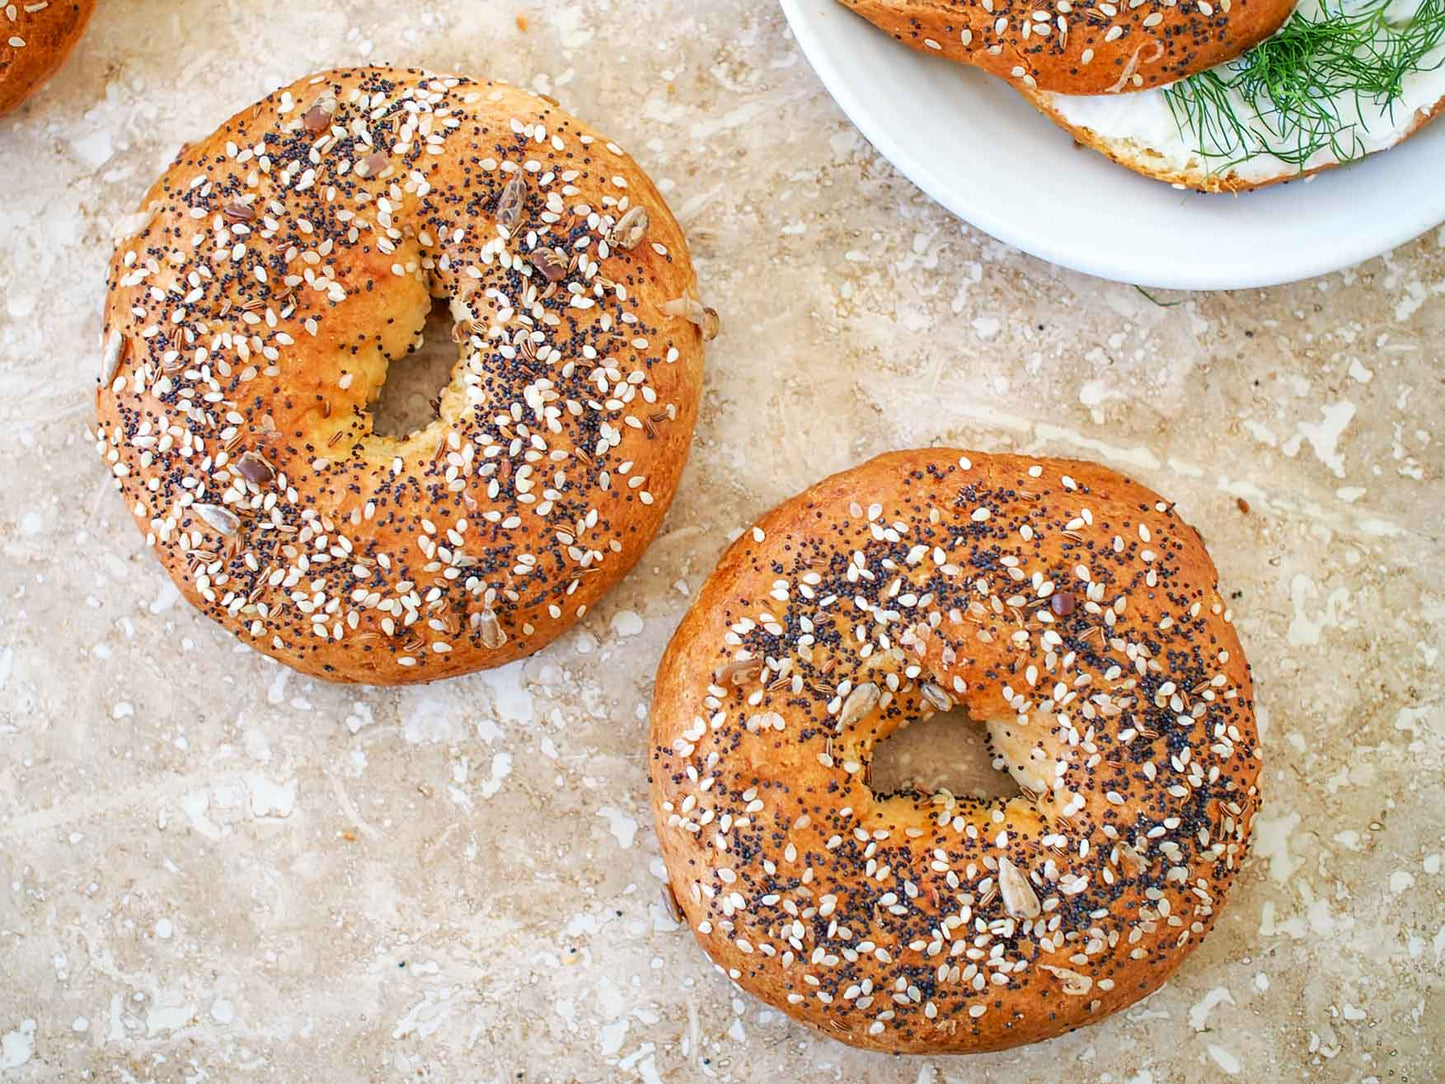 Every Seed Bagels - 5pk